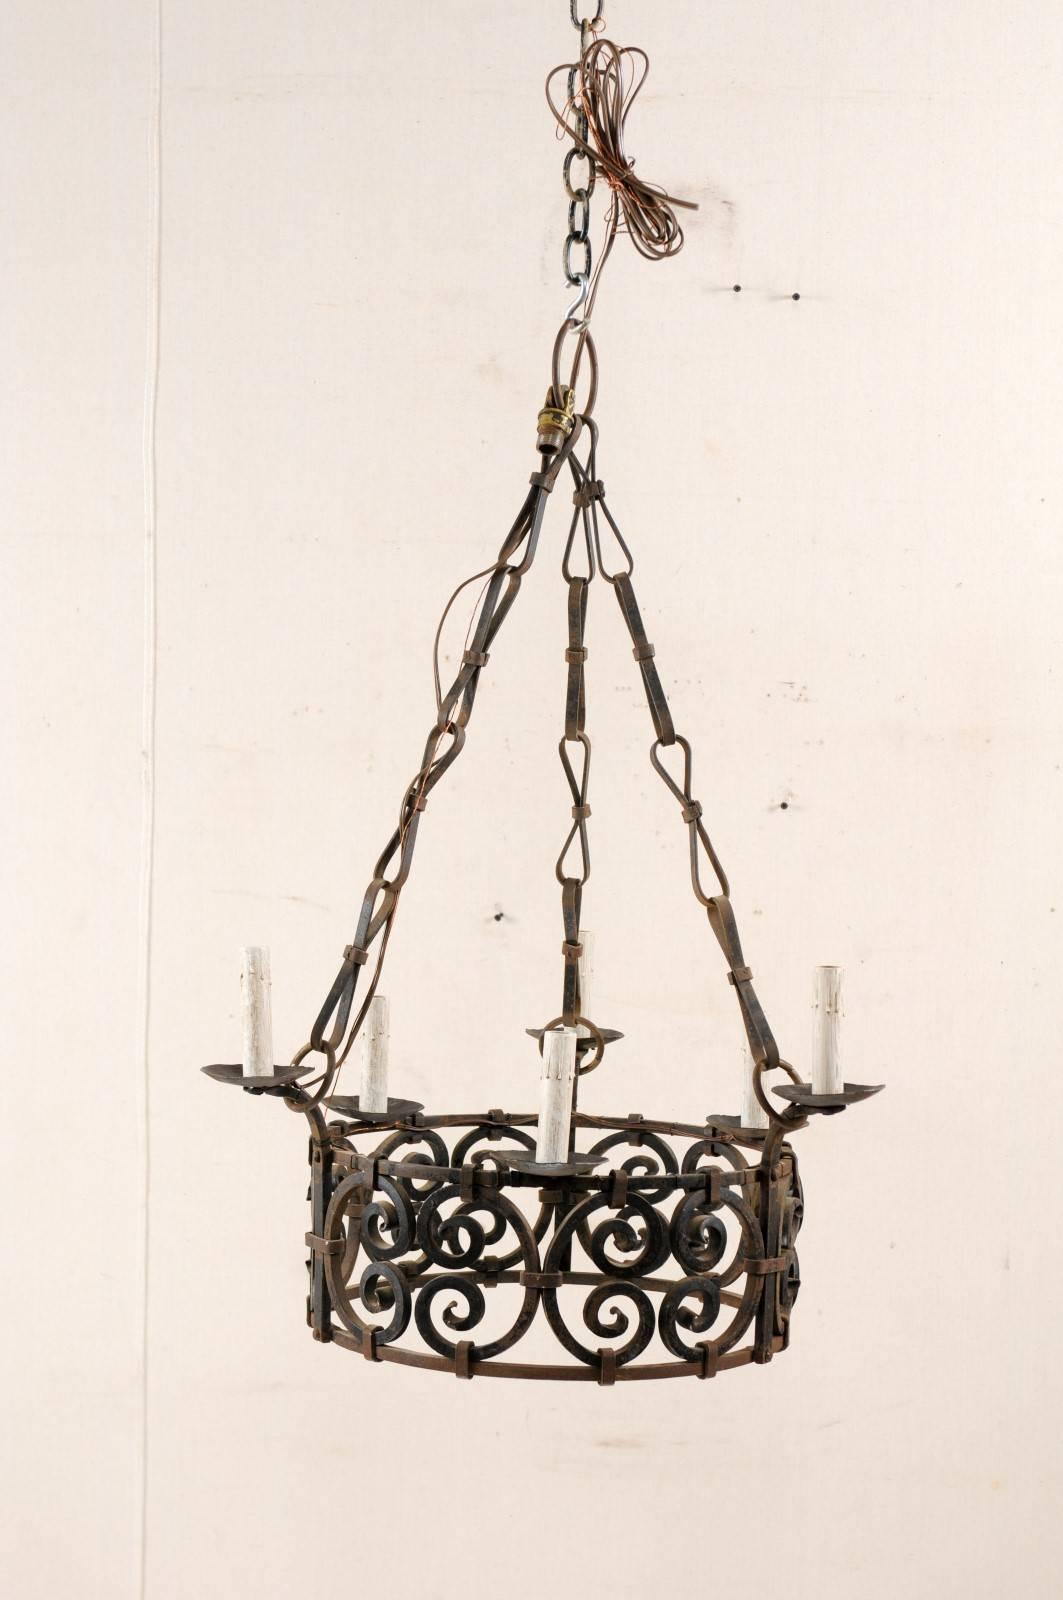 Forged French 6-Light Ornate Iron Ring Chandelier in C-Scroll Motif & Bow Linked Chains For Sale